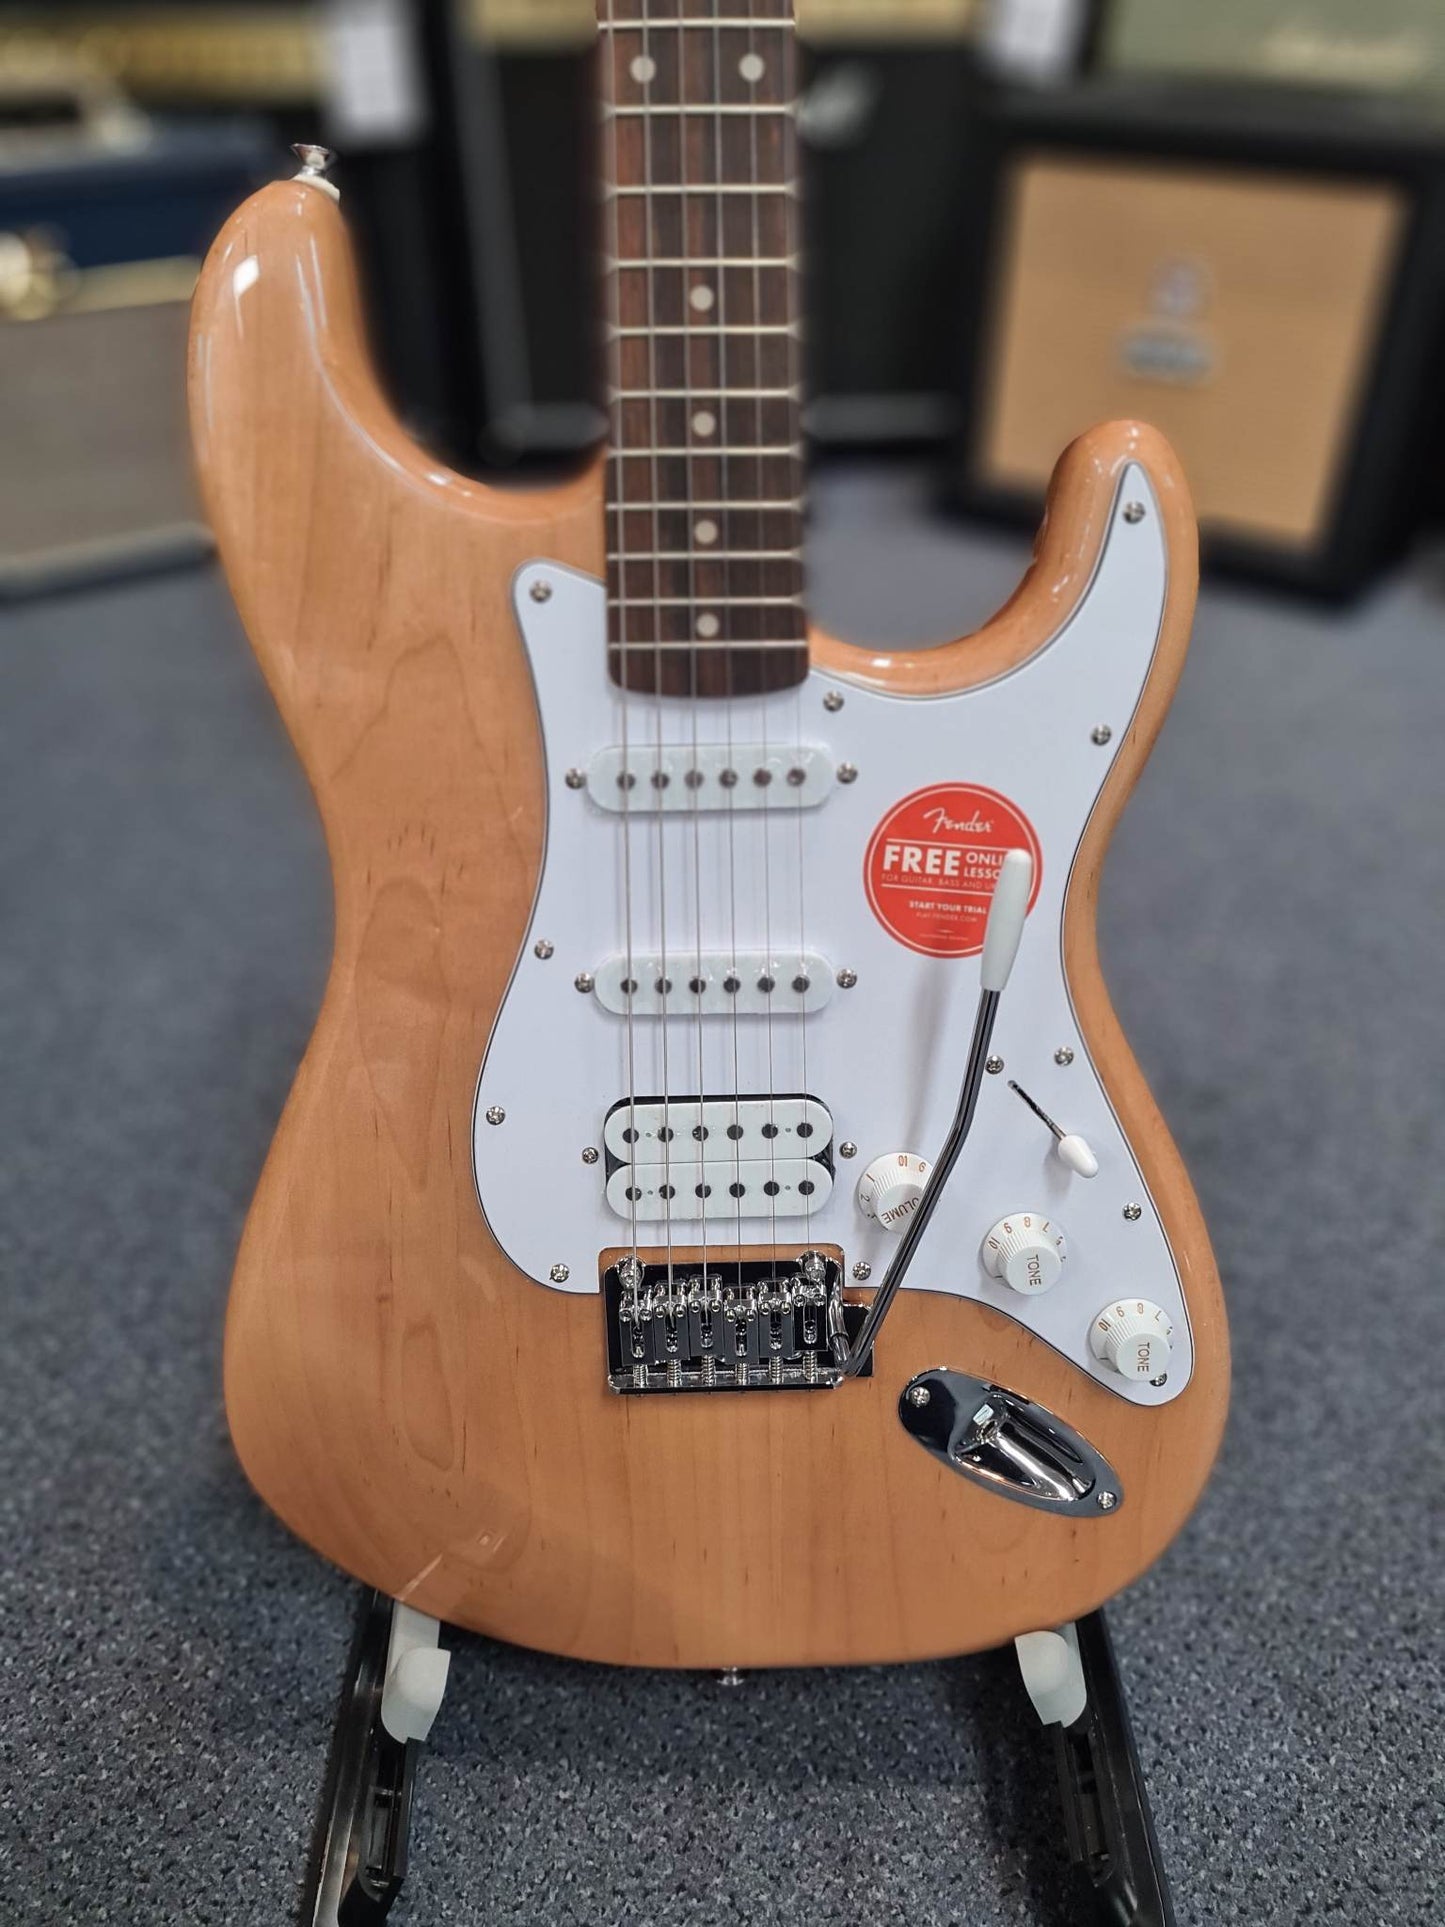 Squier Affinity Stratocaster HSS Natural